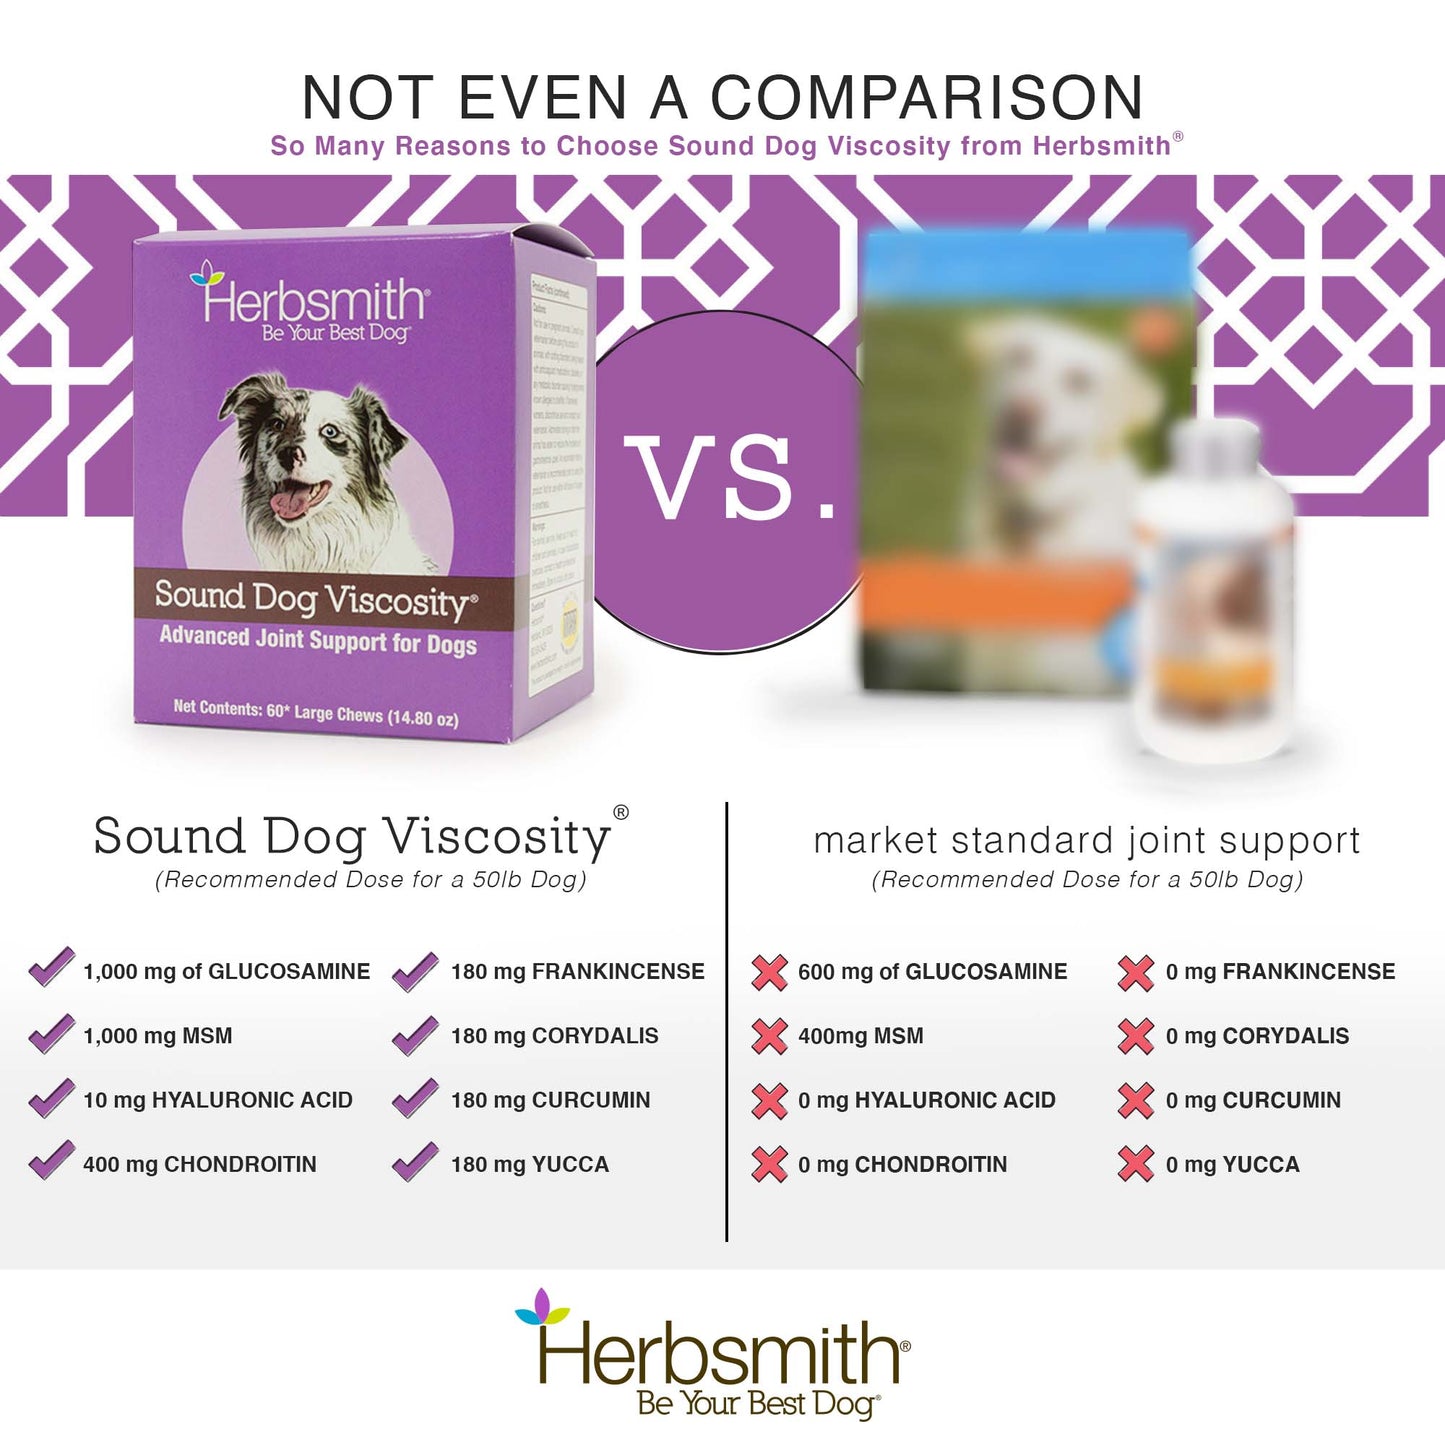 herbsmith-amazon-art-files-sound-dog-viscosity-competitors-competition-Final-UPDATE-2